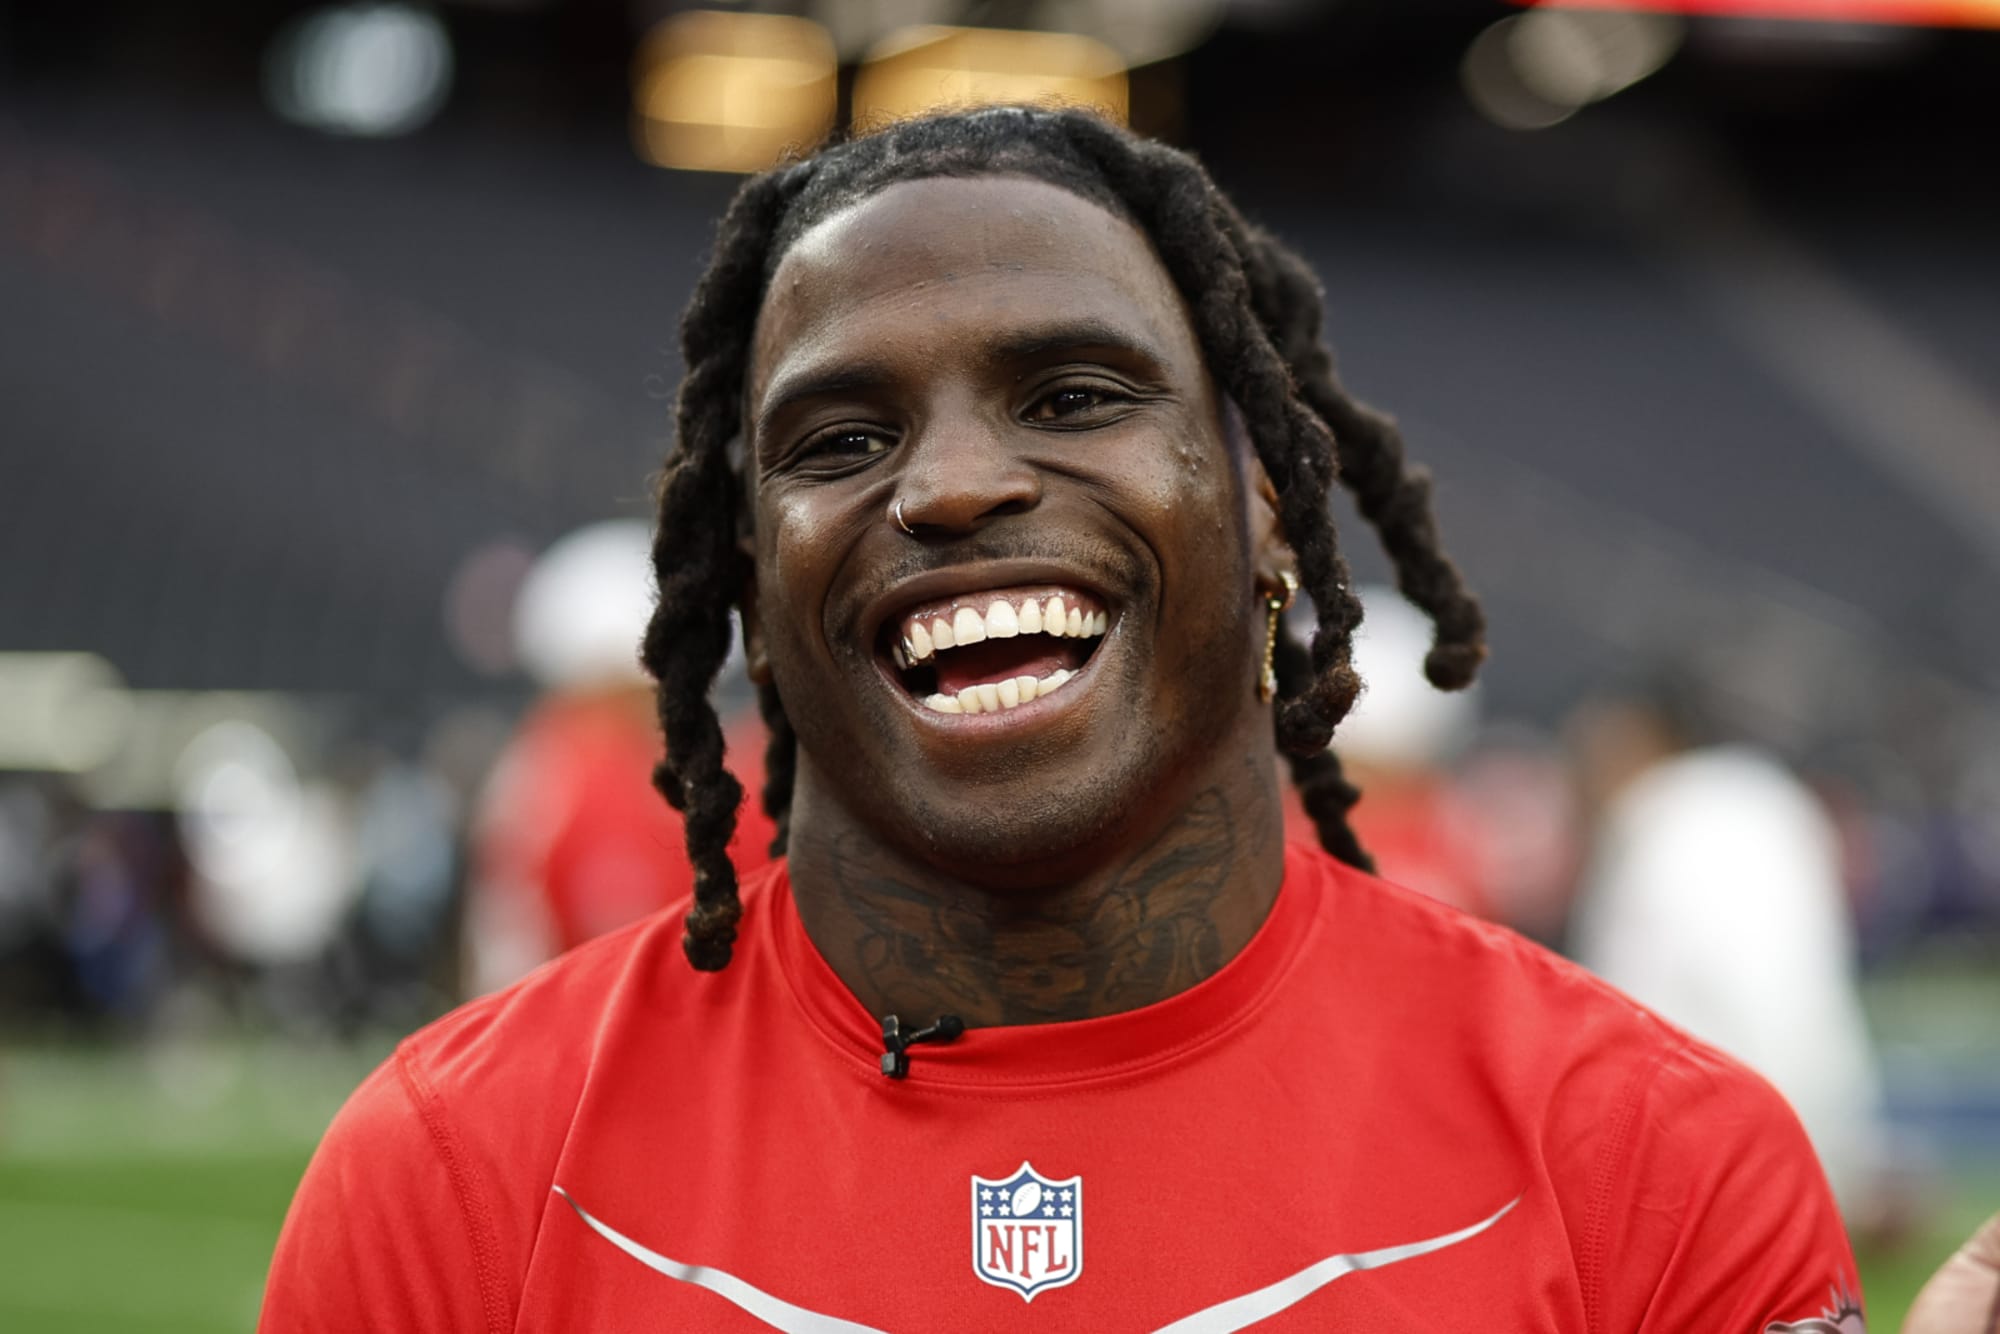 Tyreek Hill and F1 star demonstrate just how freakishly talented pro athletes are